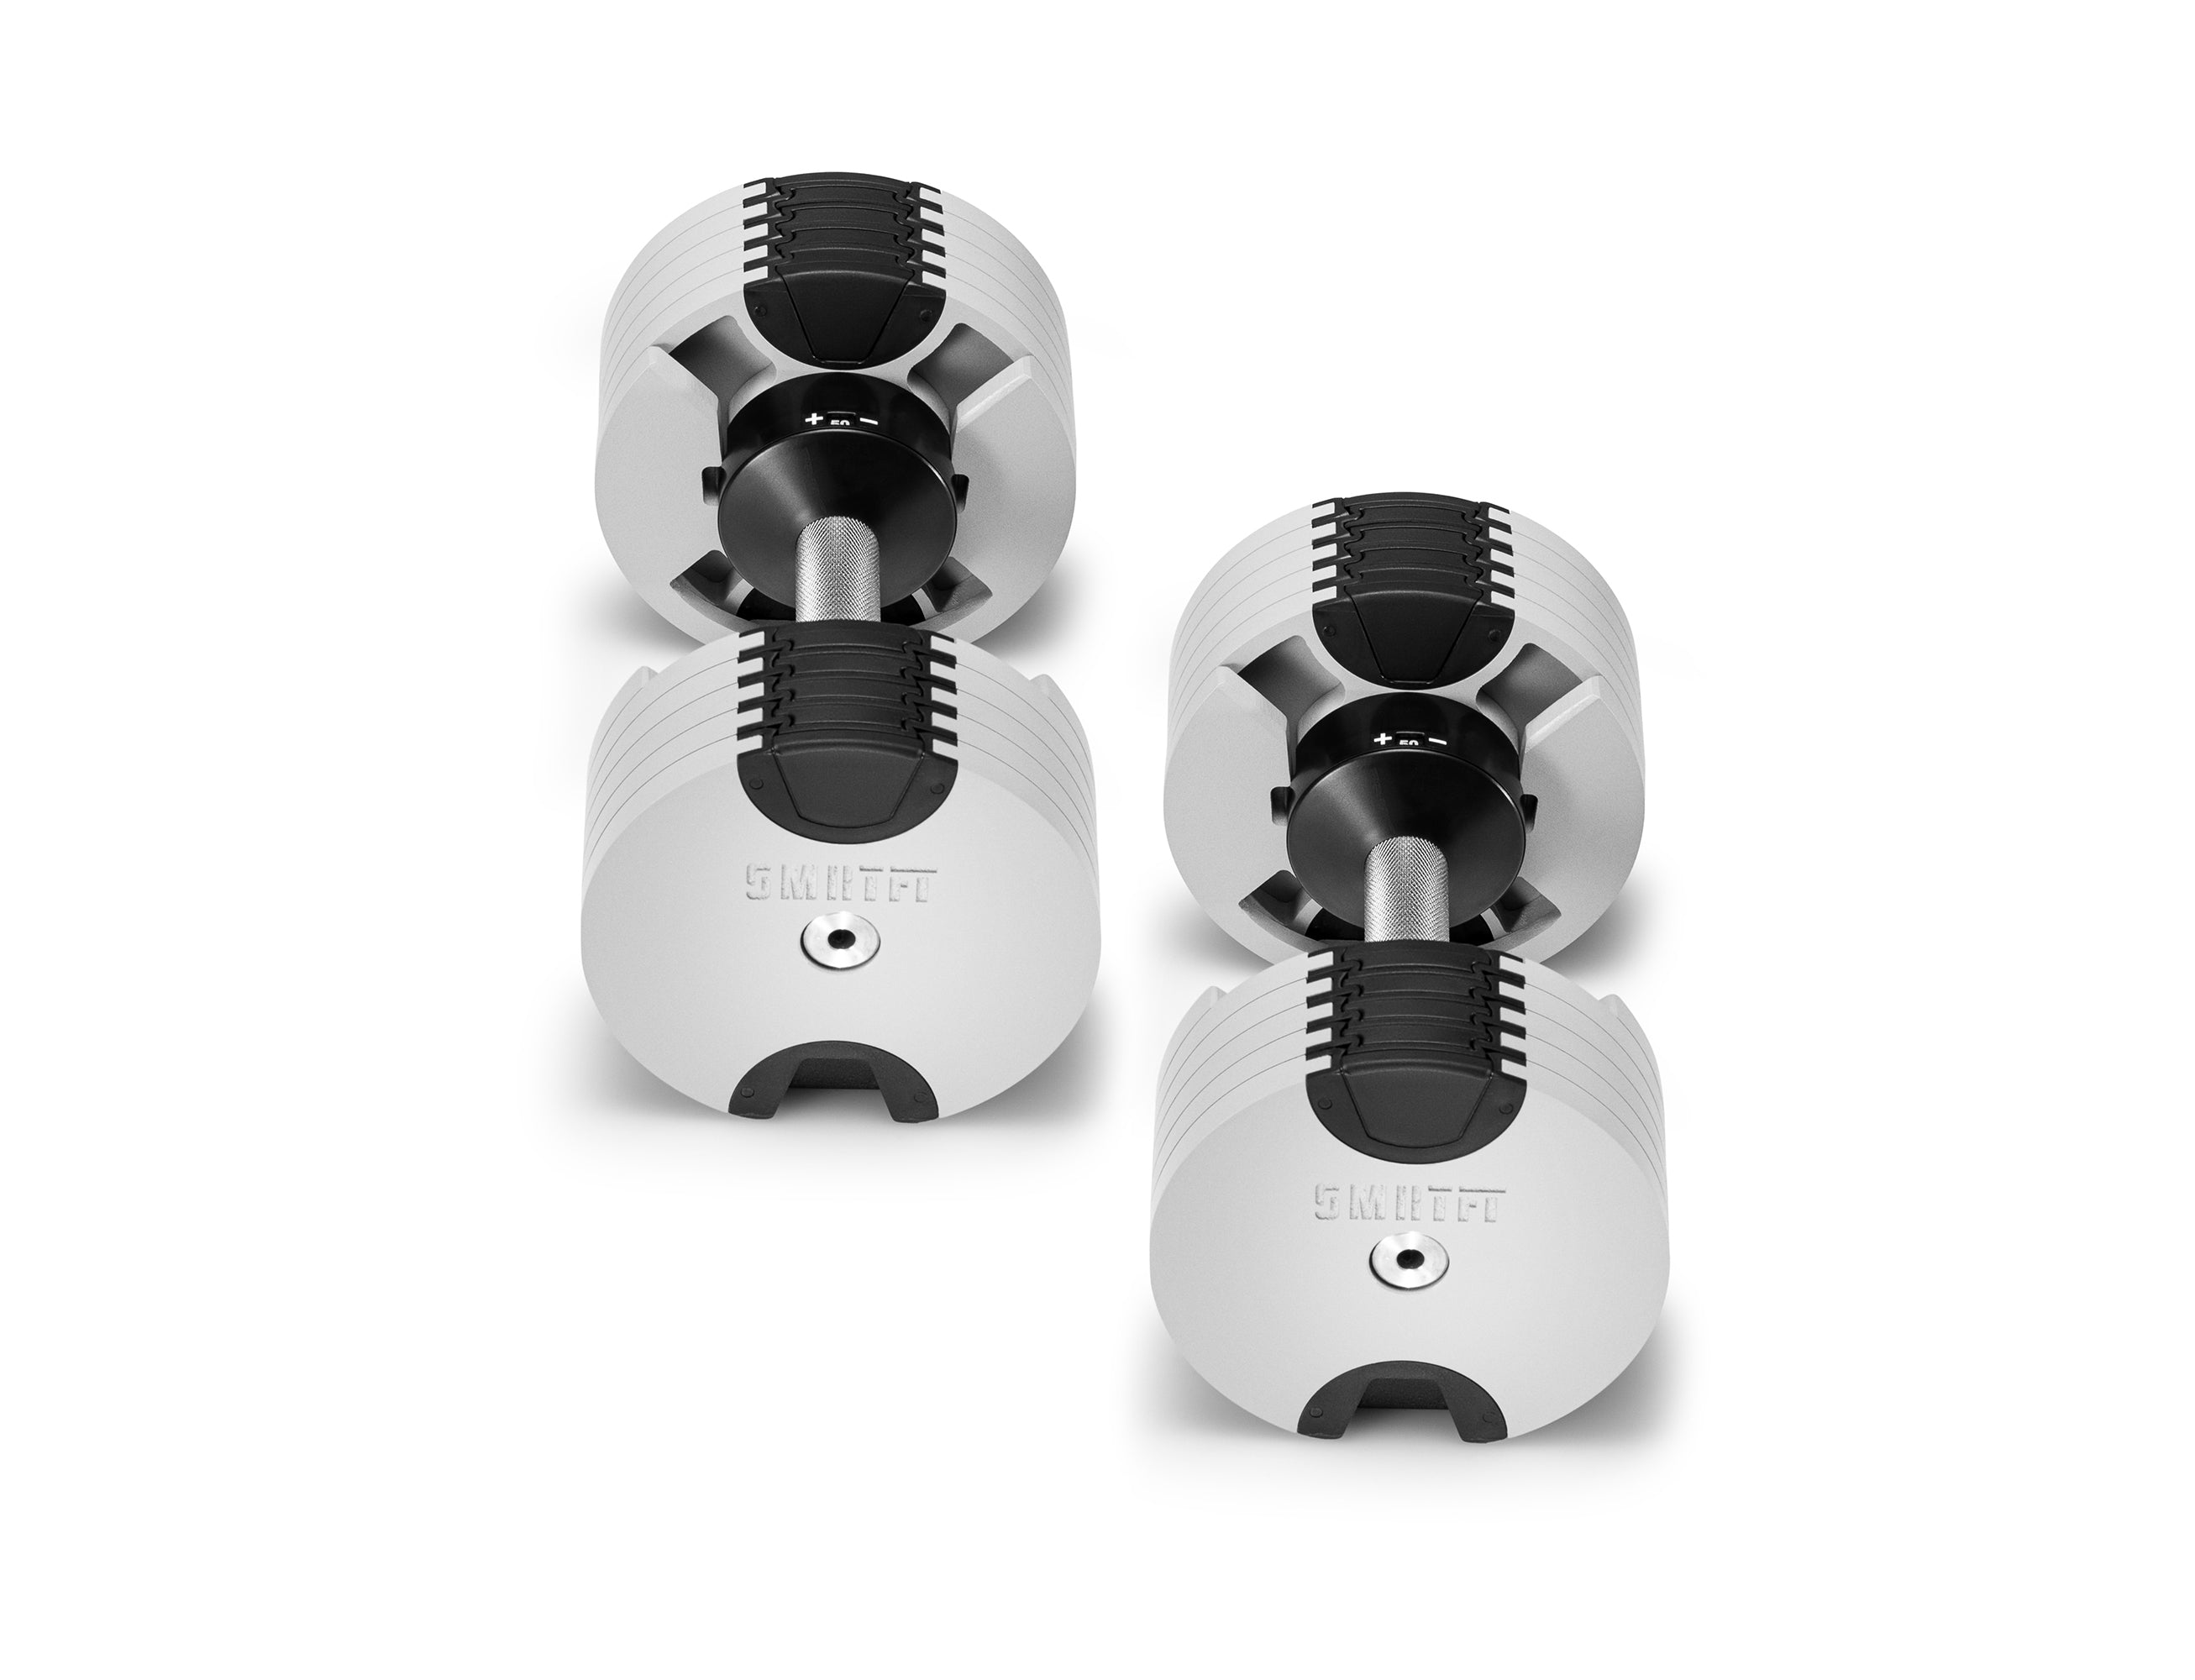 Discover Now The New White 50lb Dumbbells Created By SMRTFT